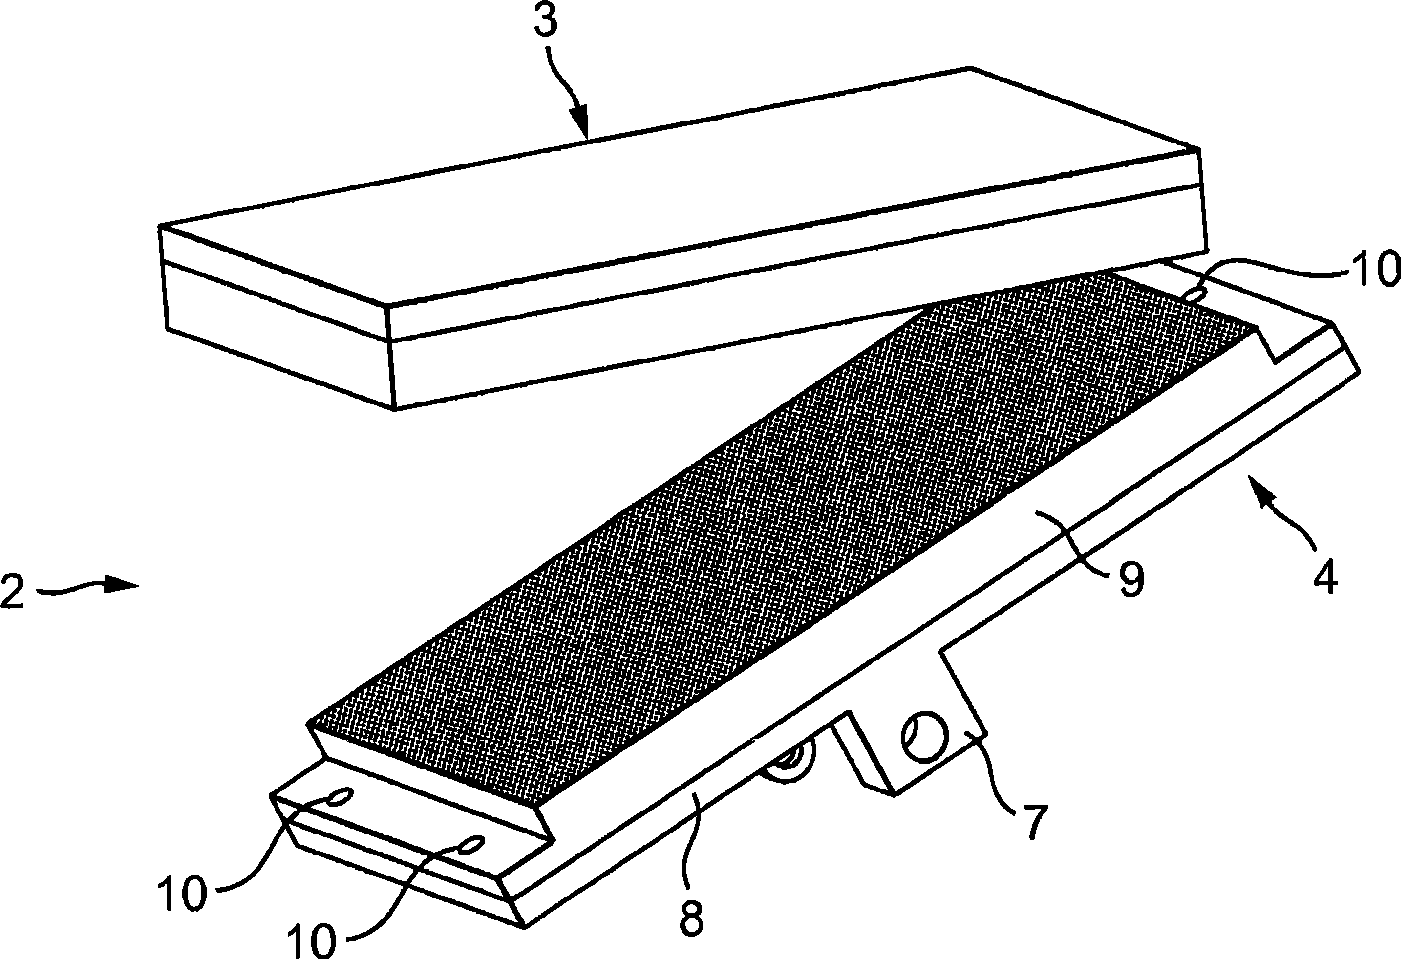 An induction wafer baking system